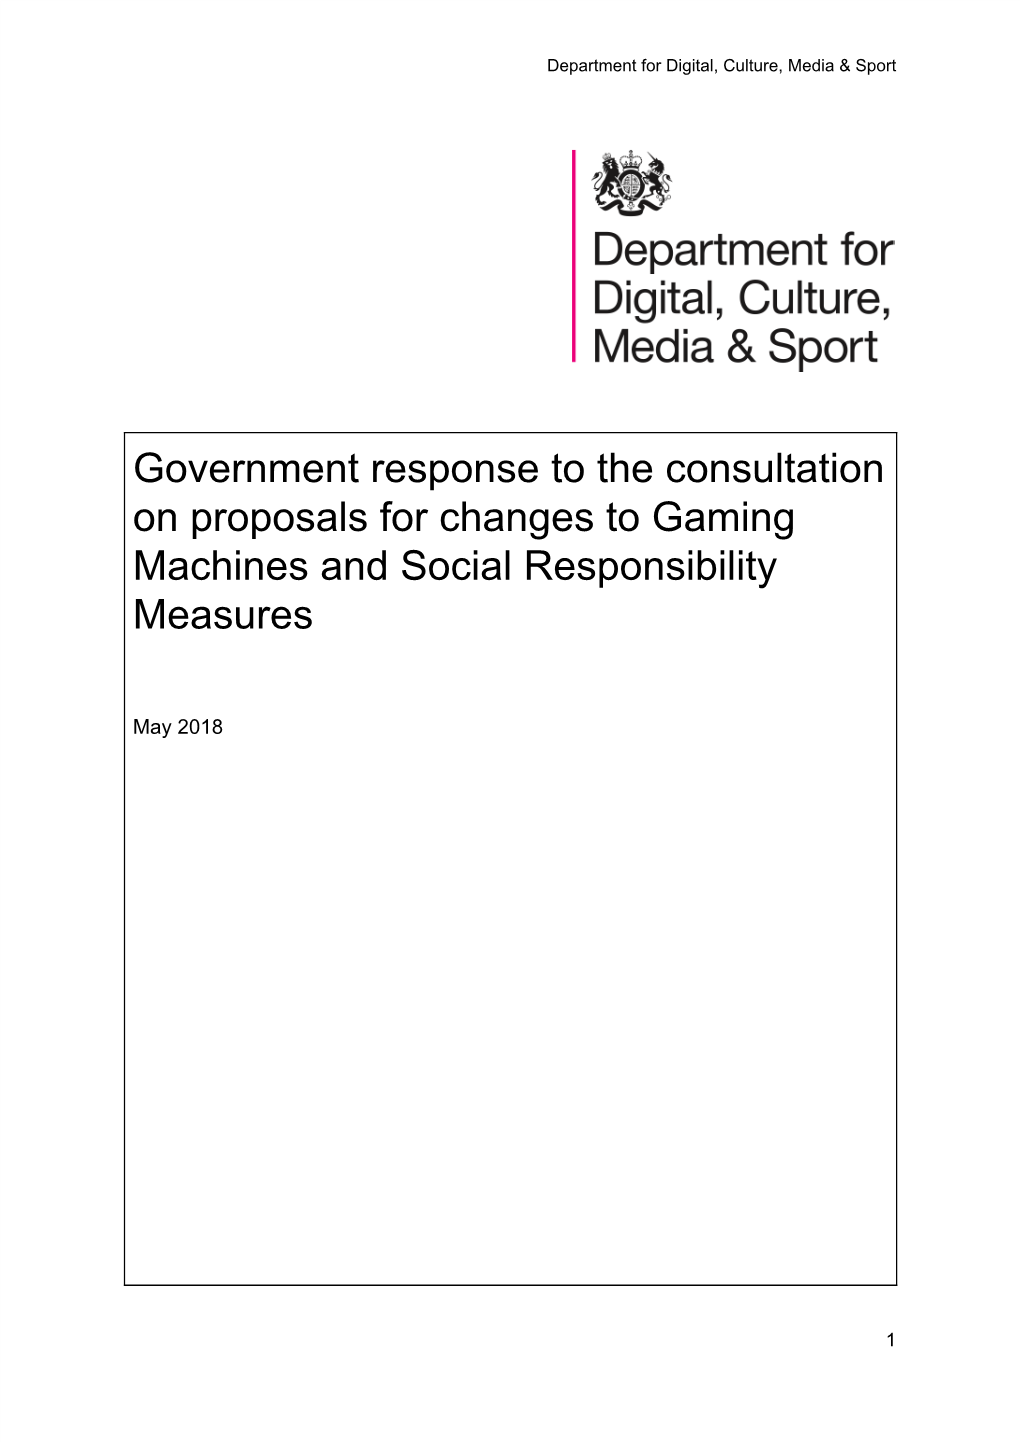 Government Response to the Consultation on Proposals for Changes to Gaming Machines and Social Responsibility Measures